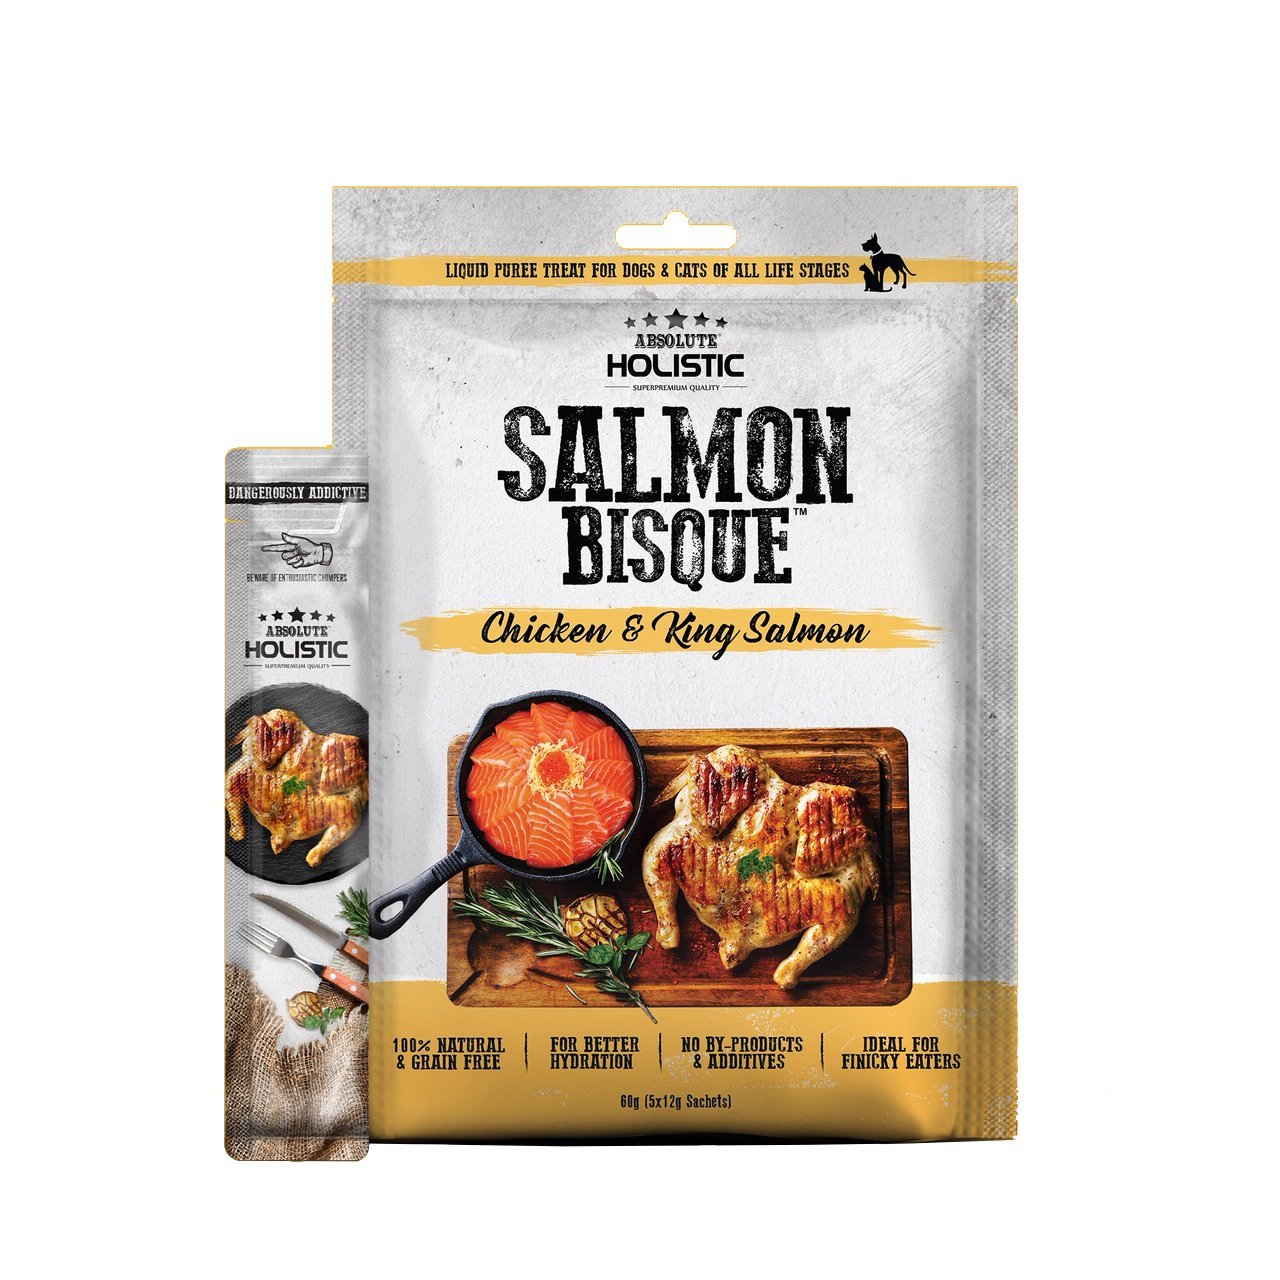 Absolute Holistic Bisque Chicken & King Salmon Treat 60g - Woonona Petfood & Produce